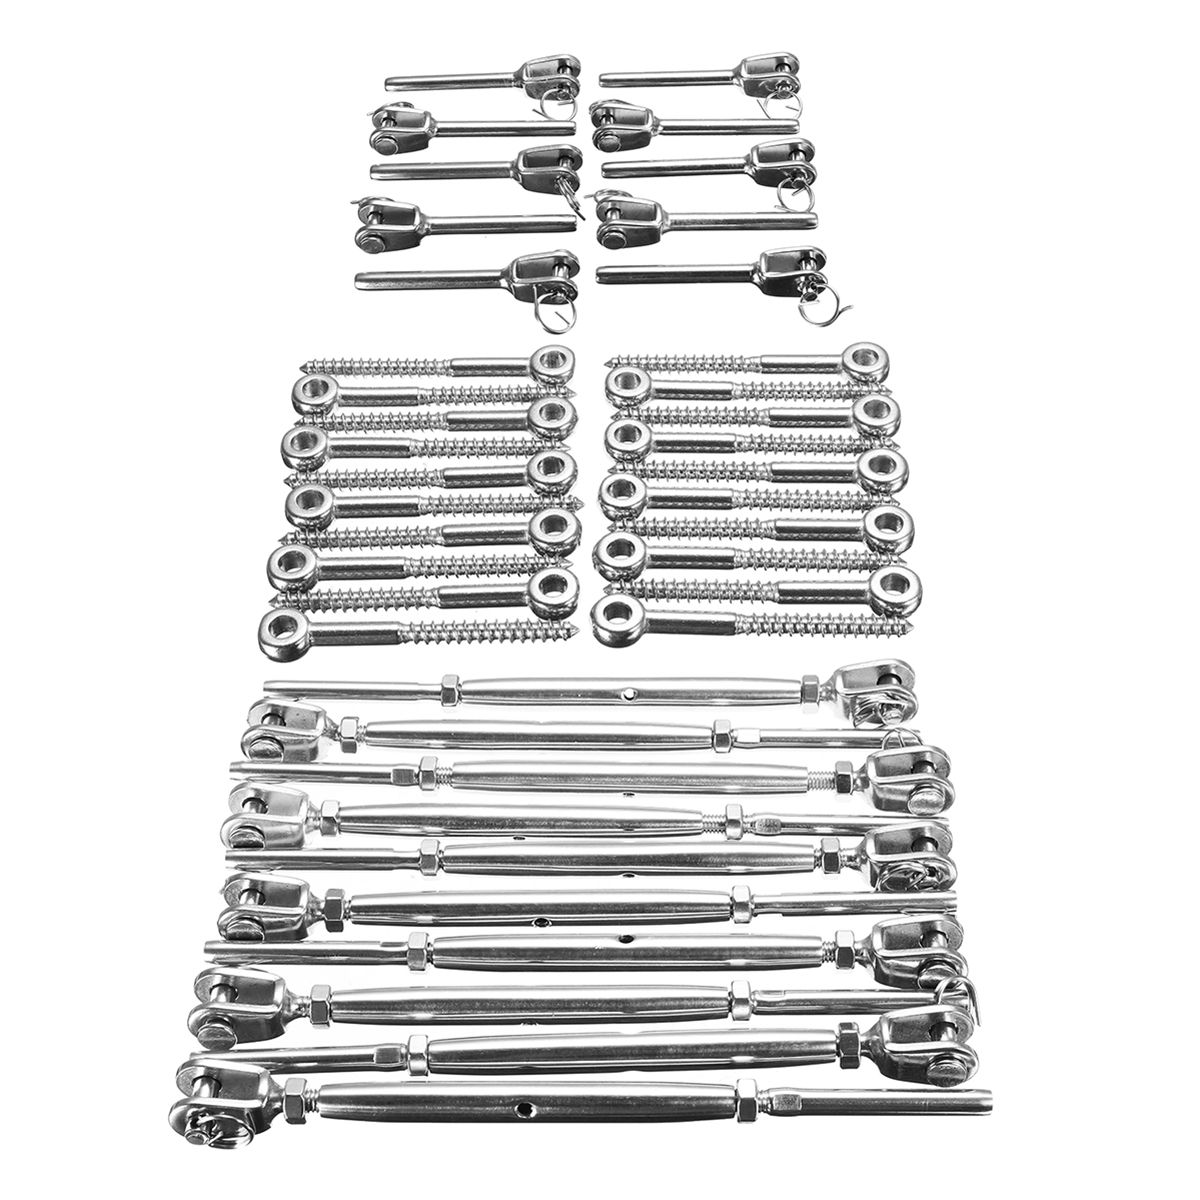 10-Sets-Stainless-Steel-Jaw-Swage-Stud-Turn-buckle-Balustrade-Rigging-for-18quot-Cable-Railing-Rail-1310902